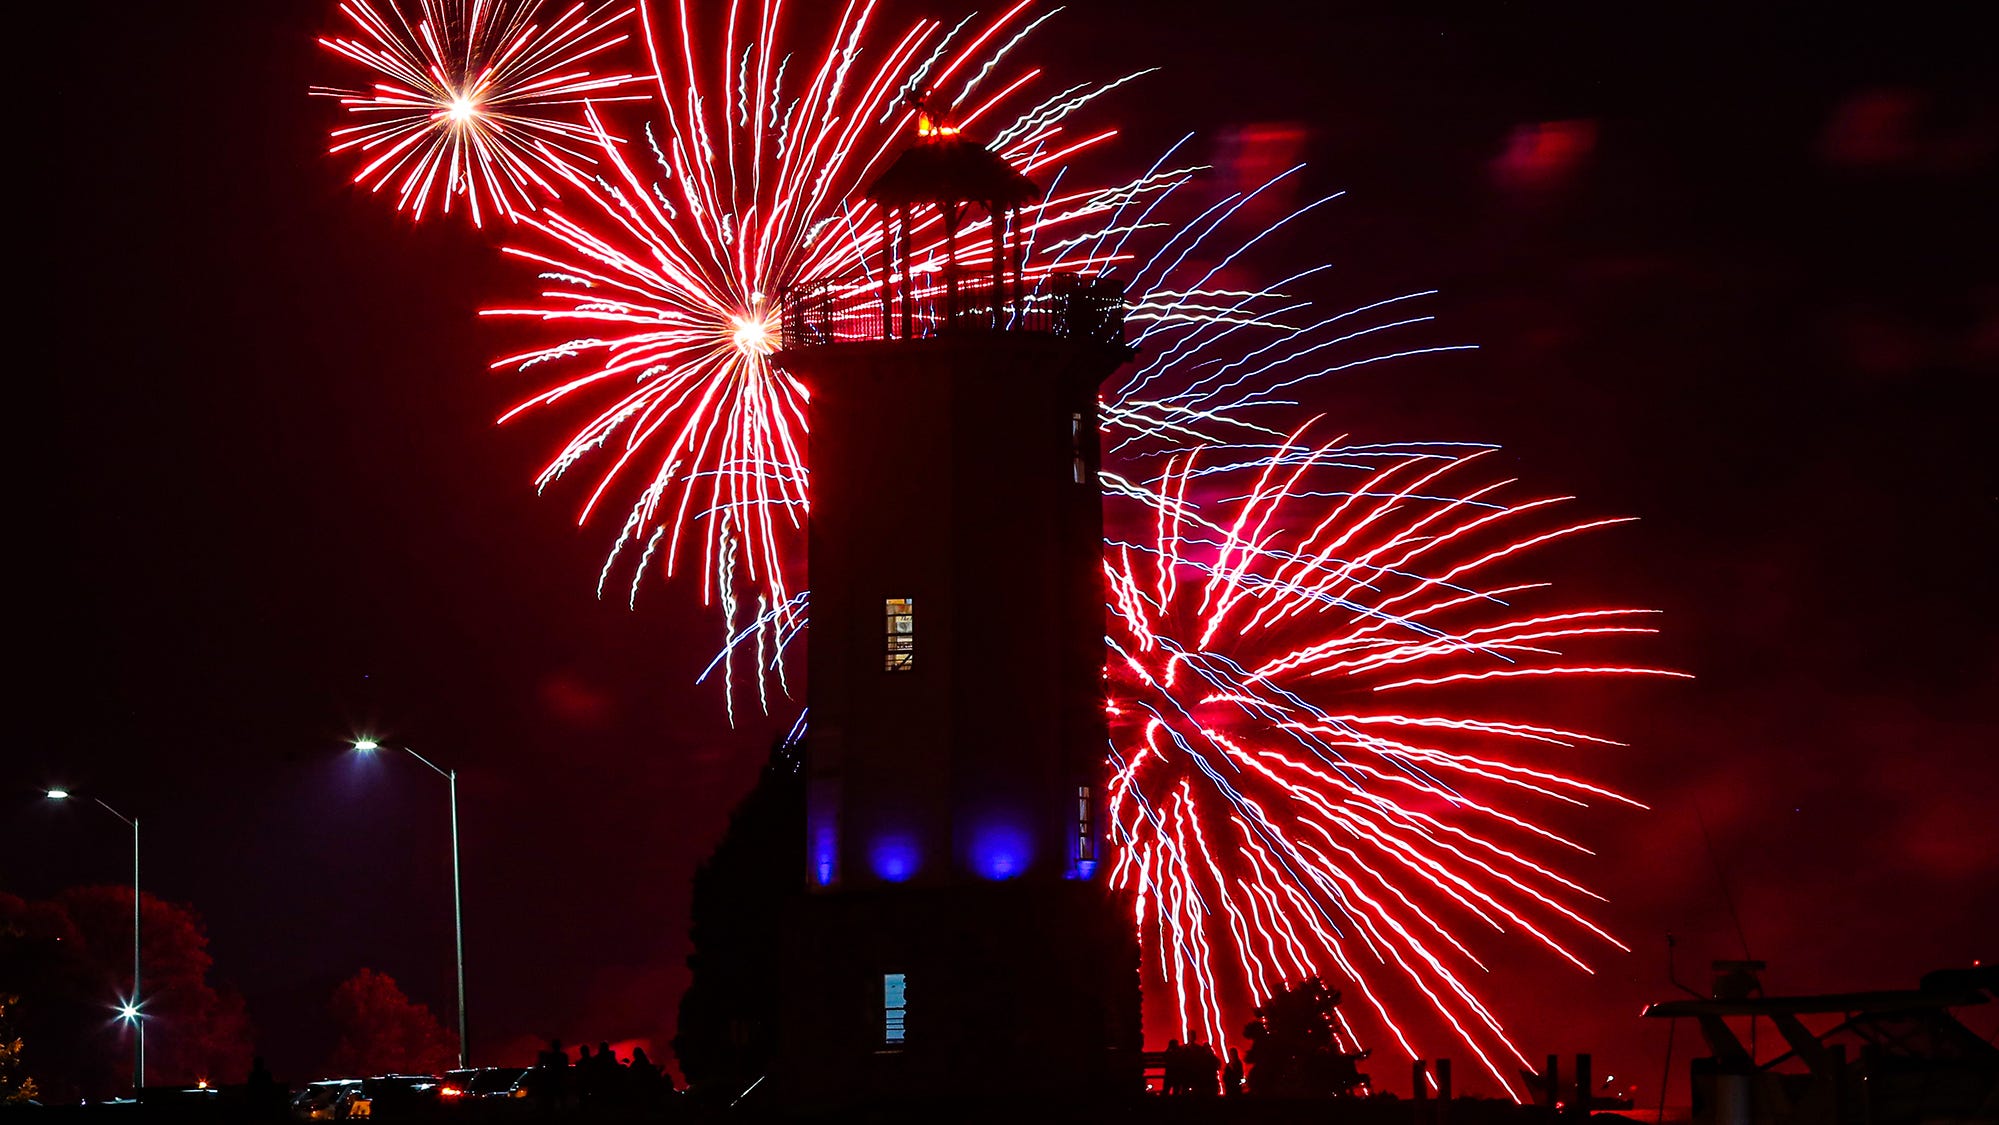 Where to watch fireworks on 4th of July near Fond du Lac, Dodge County